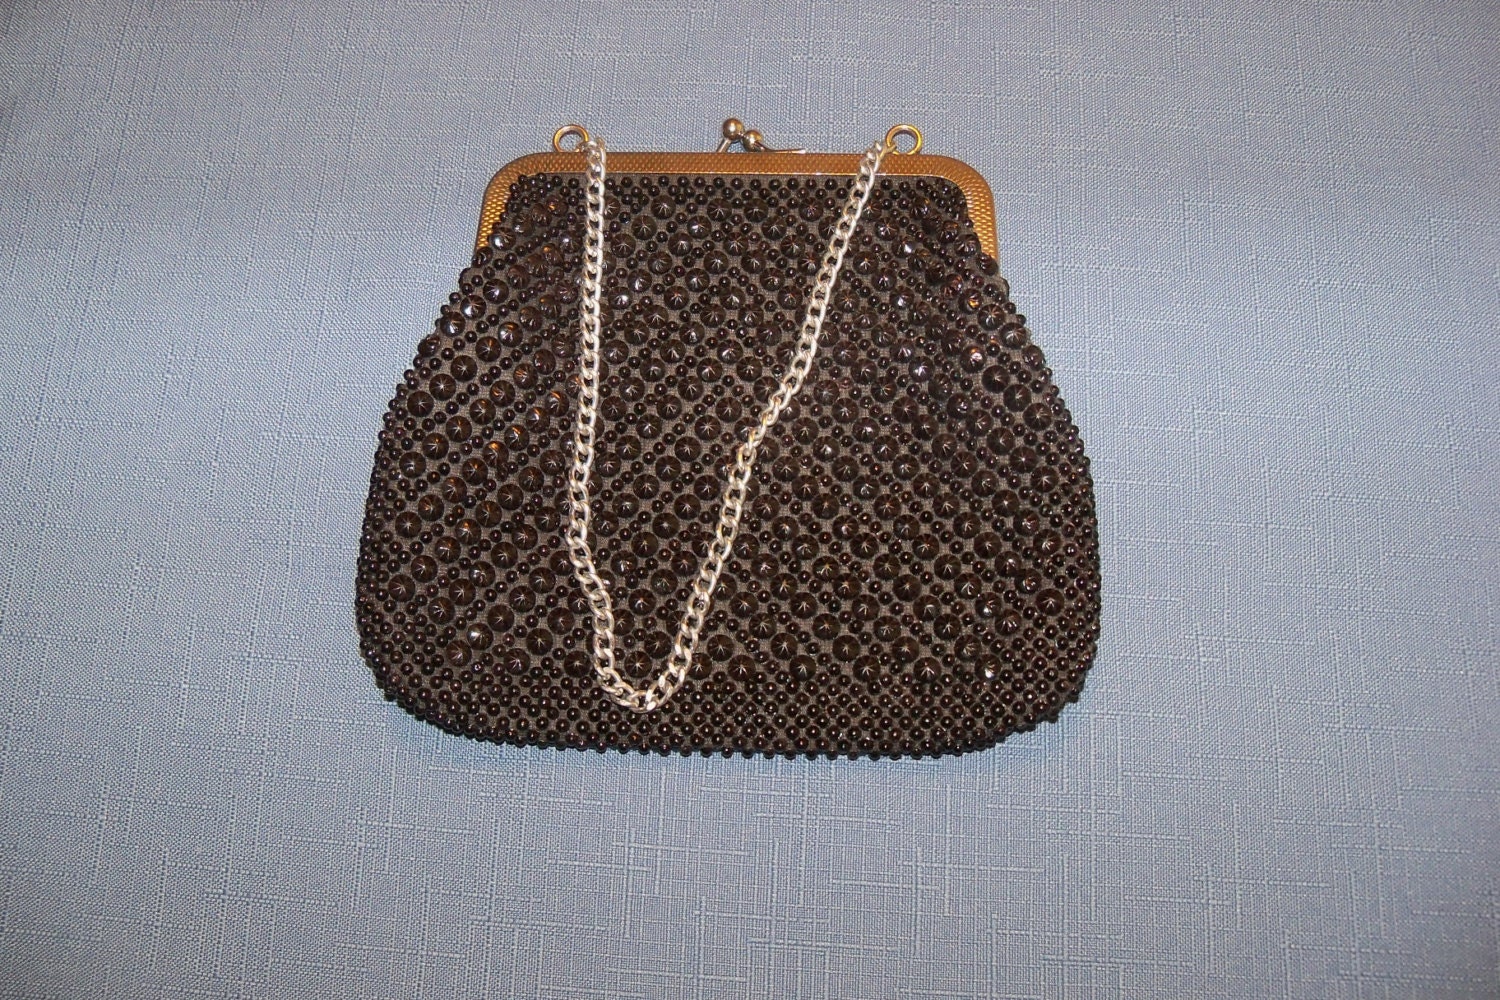 Vintage Beaded Purse Clutch Black Golden Name by YoursOccasionally